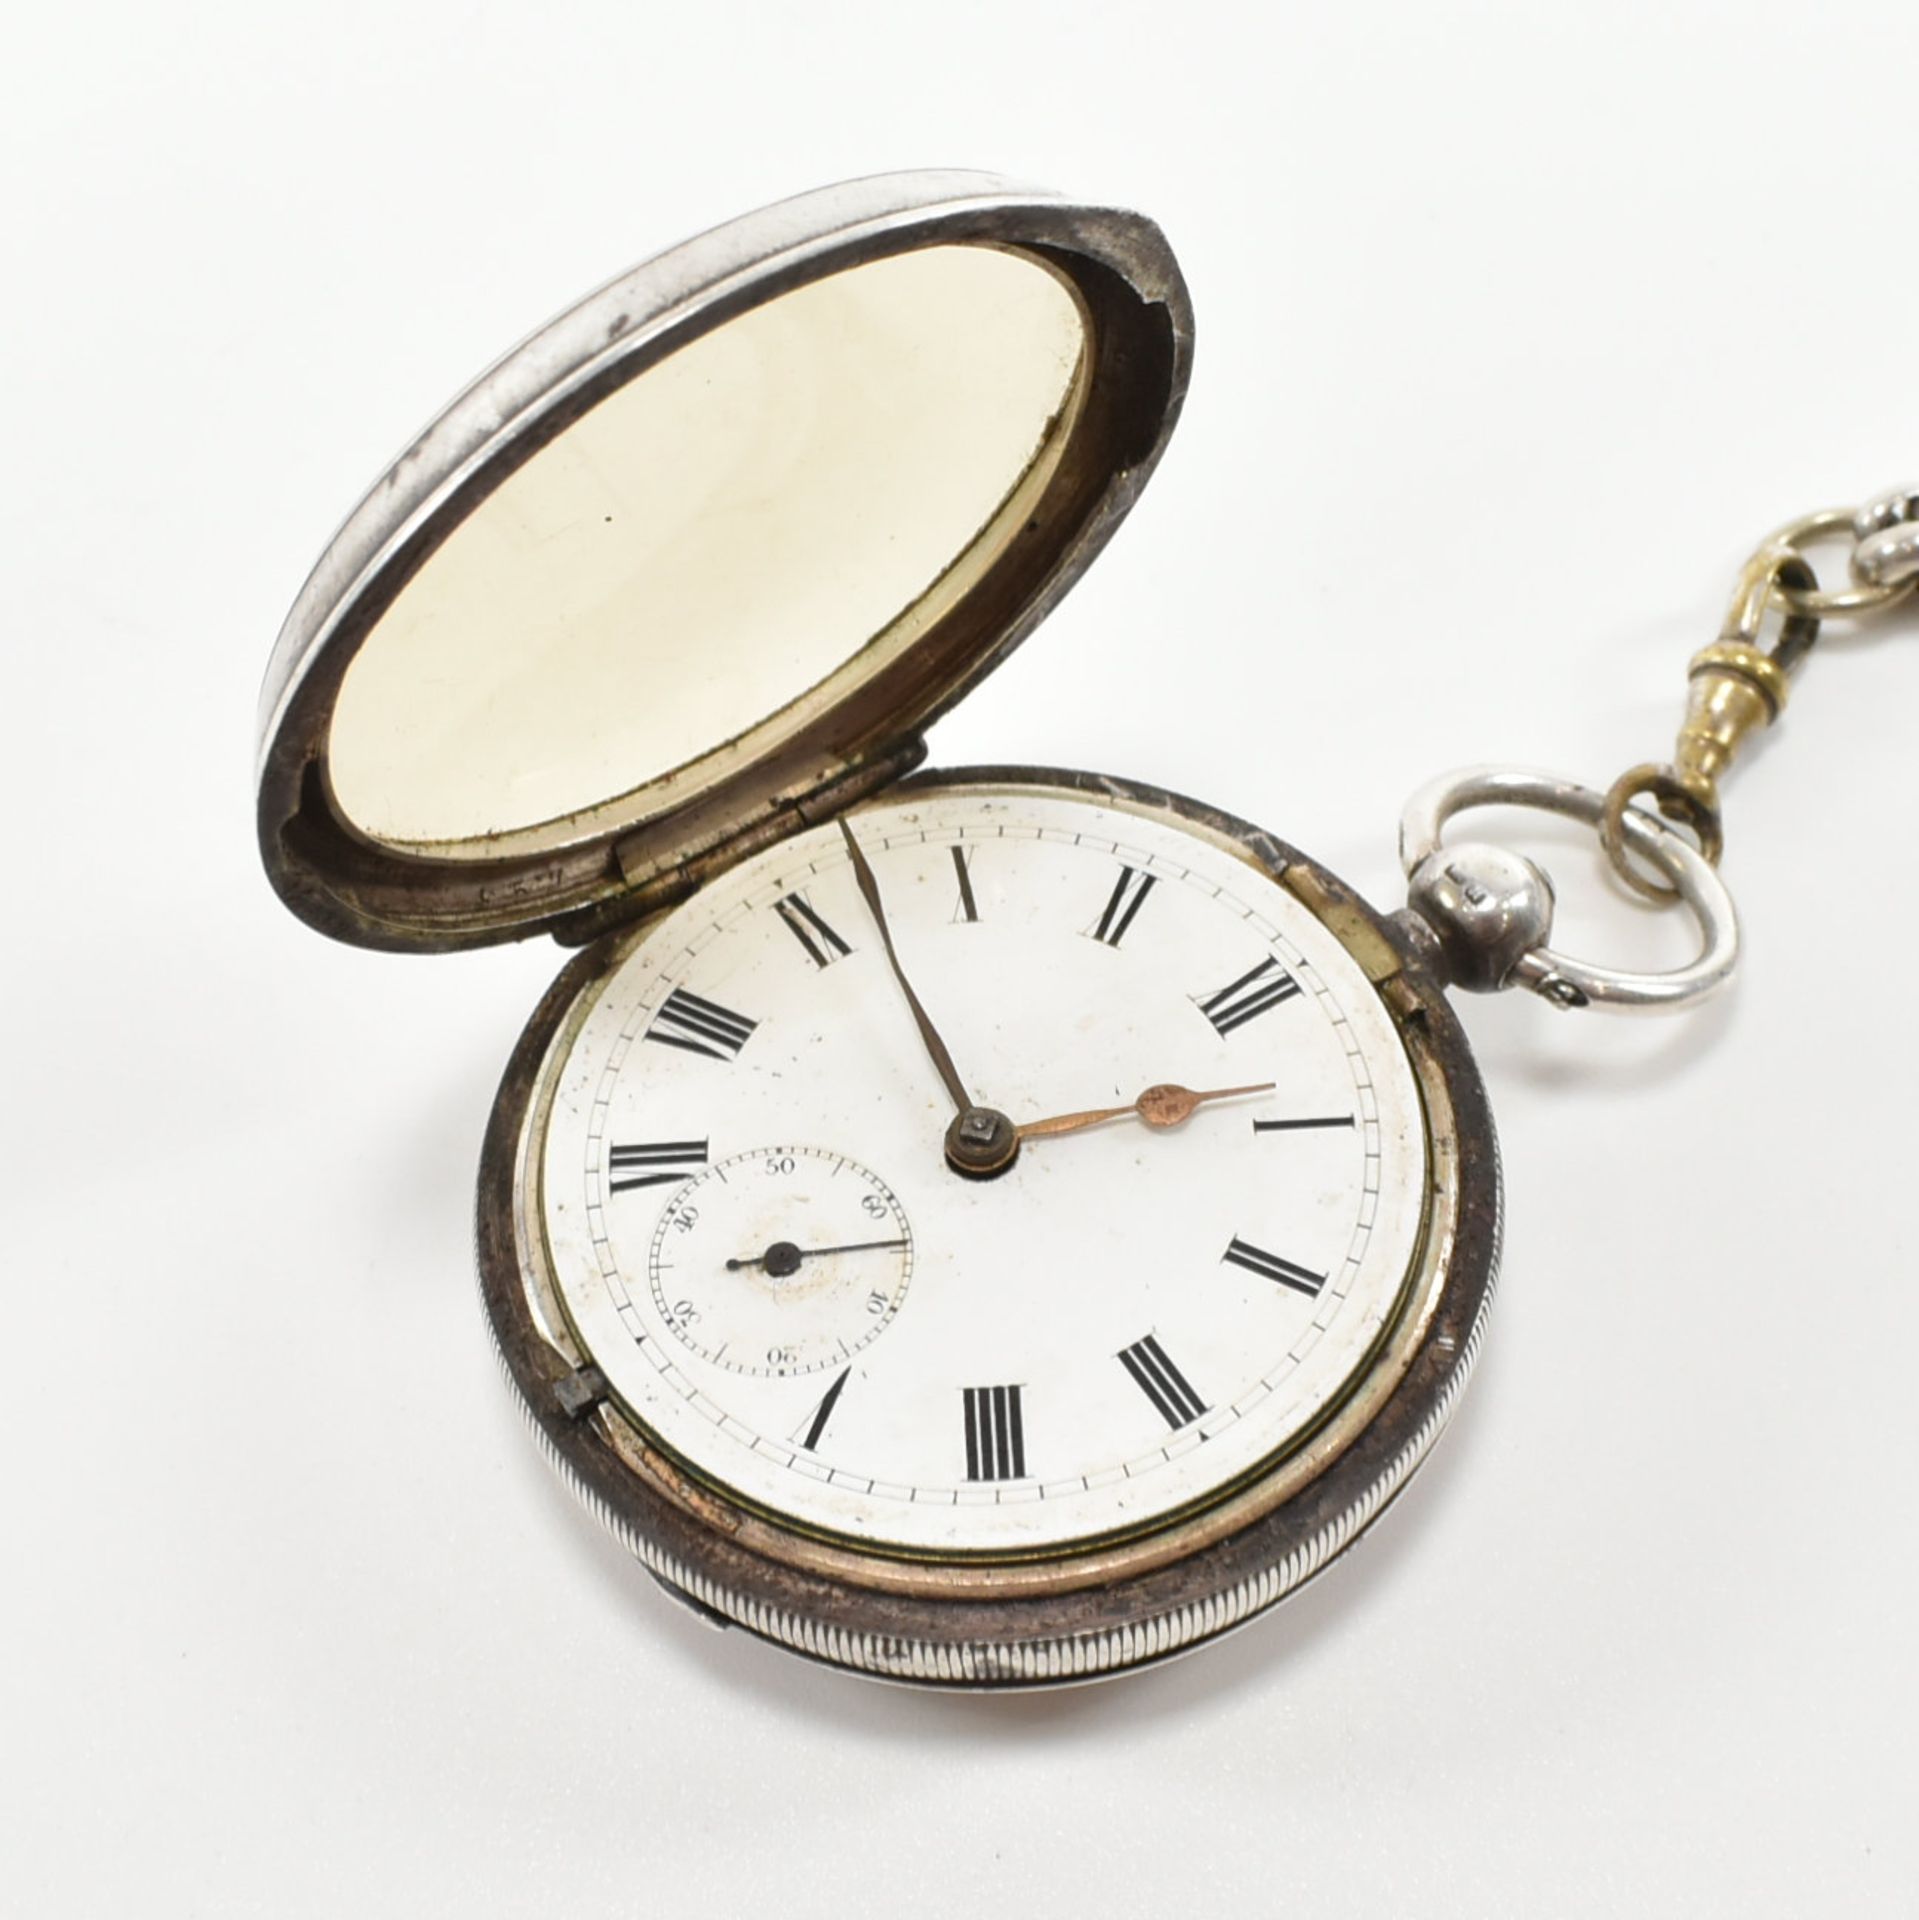 EARLY 20TH CENTURY 1901 HALLMARKED SILVER CASE POCKET WATCH - Image 14 of 14